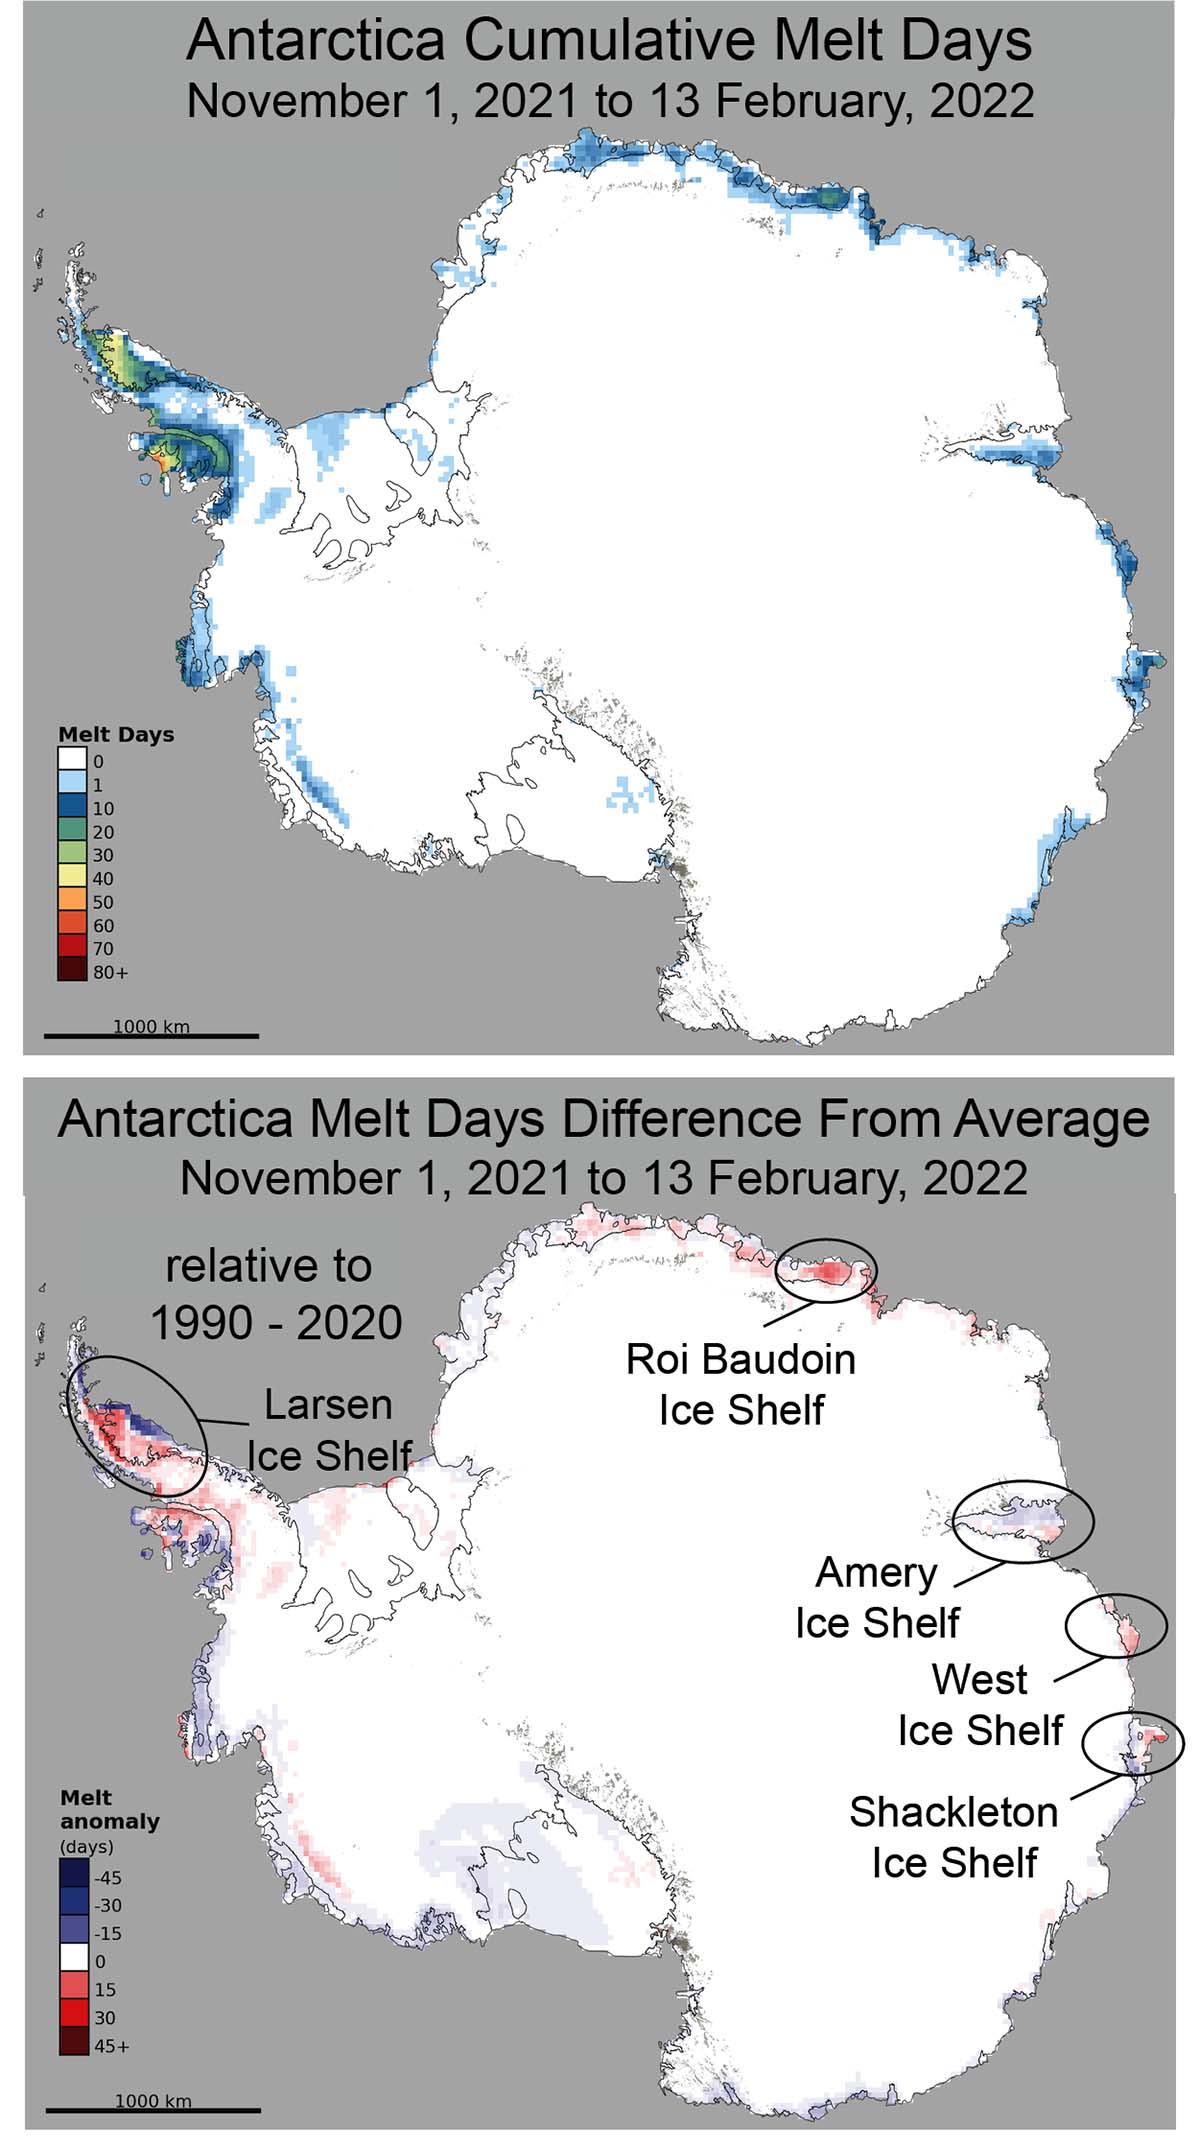 antarctic-sea-ice-extent-all-time-low-february-marked-negative-anomaly-meltingdays